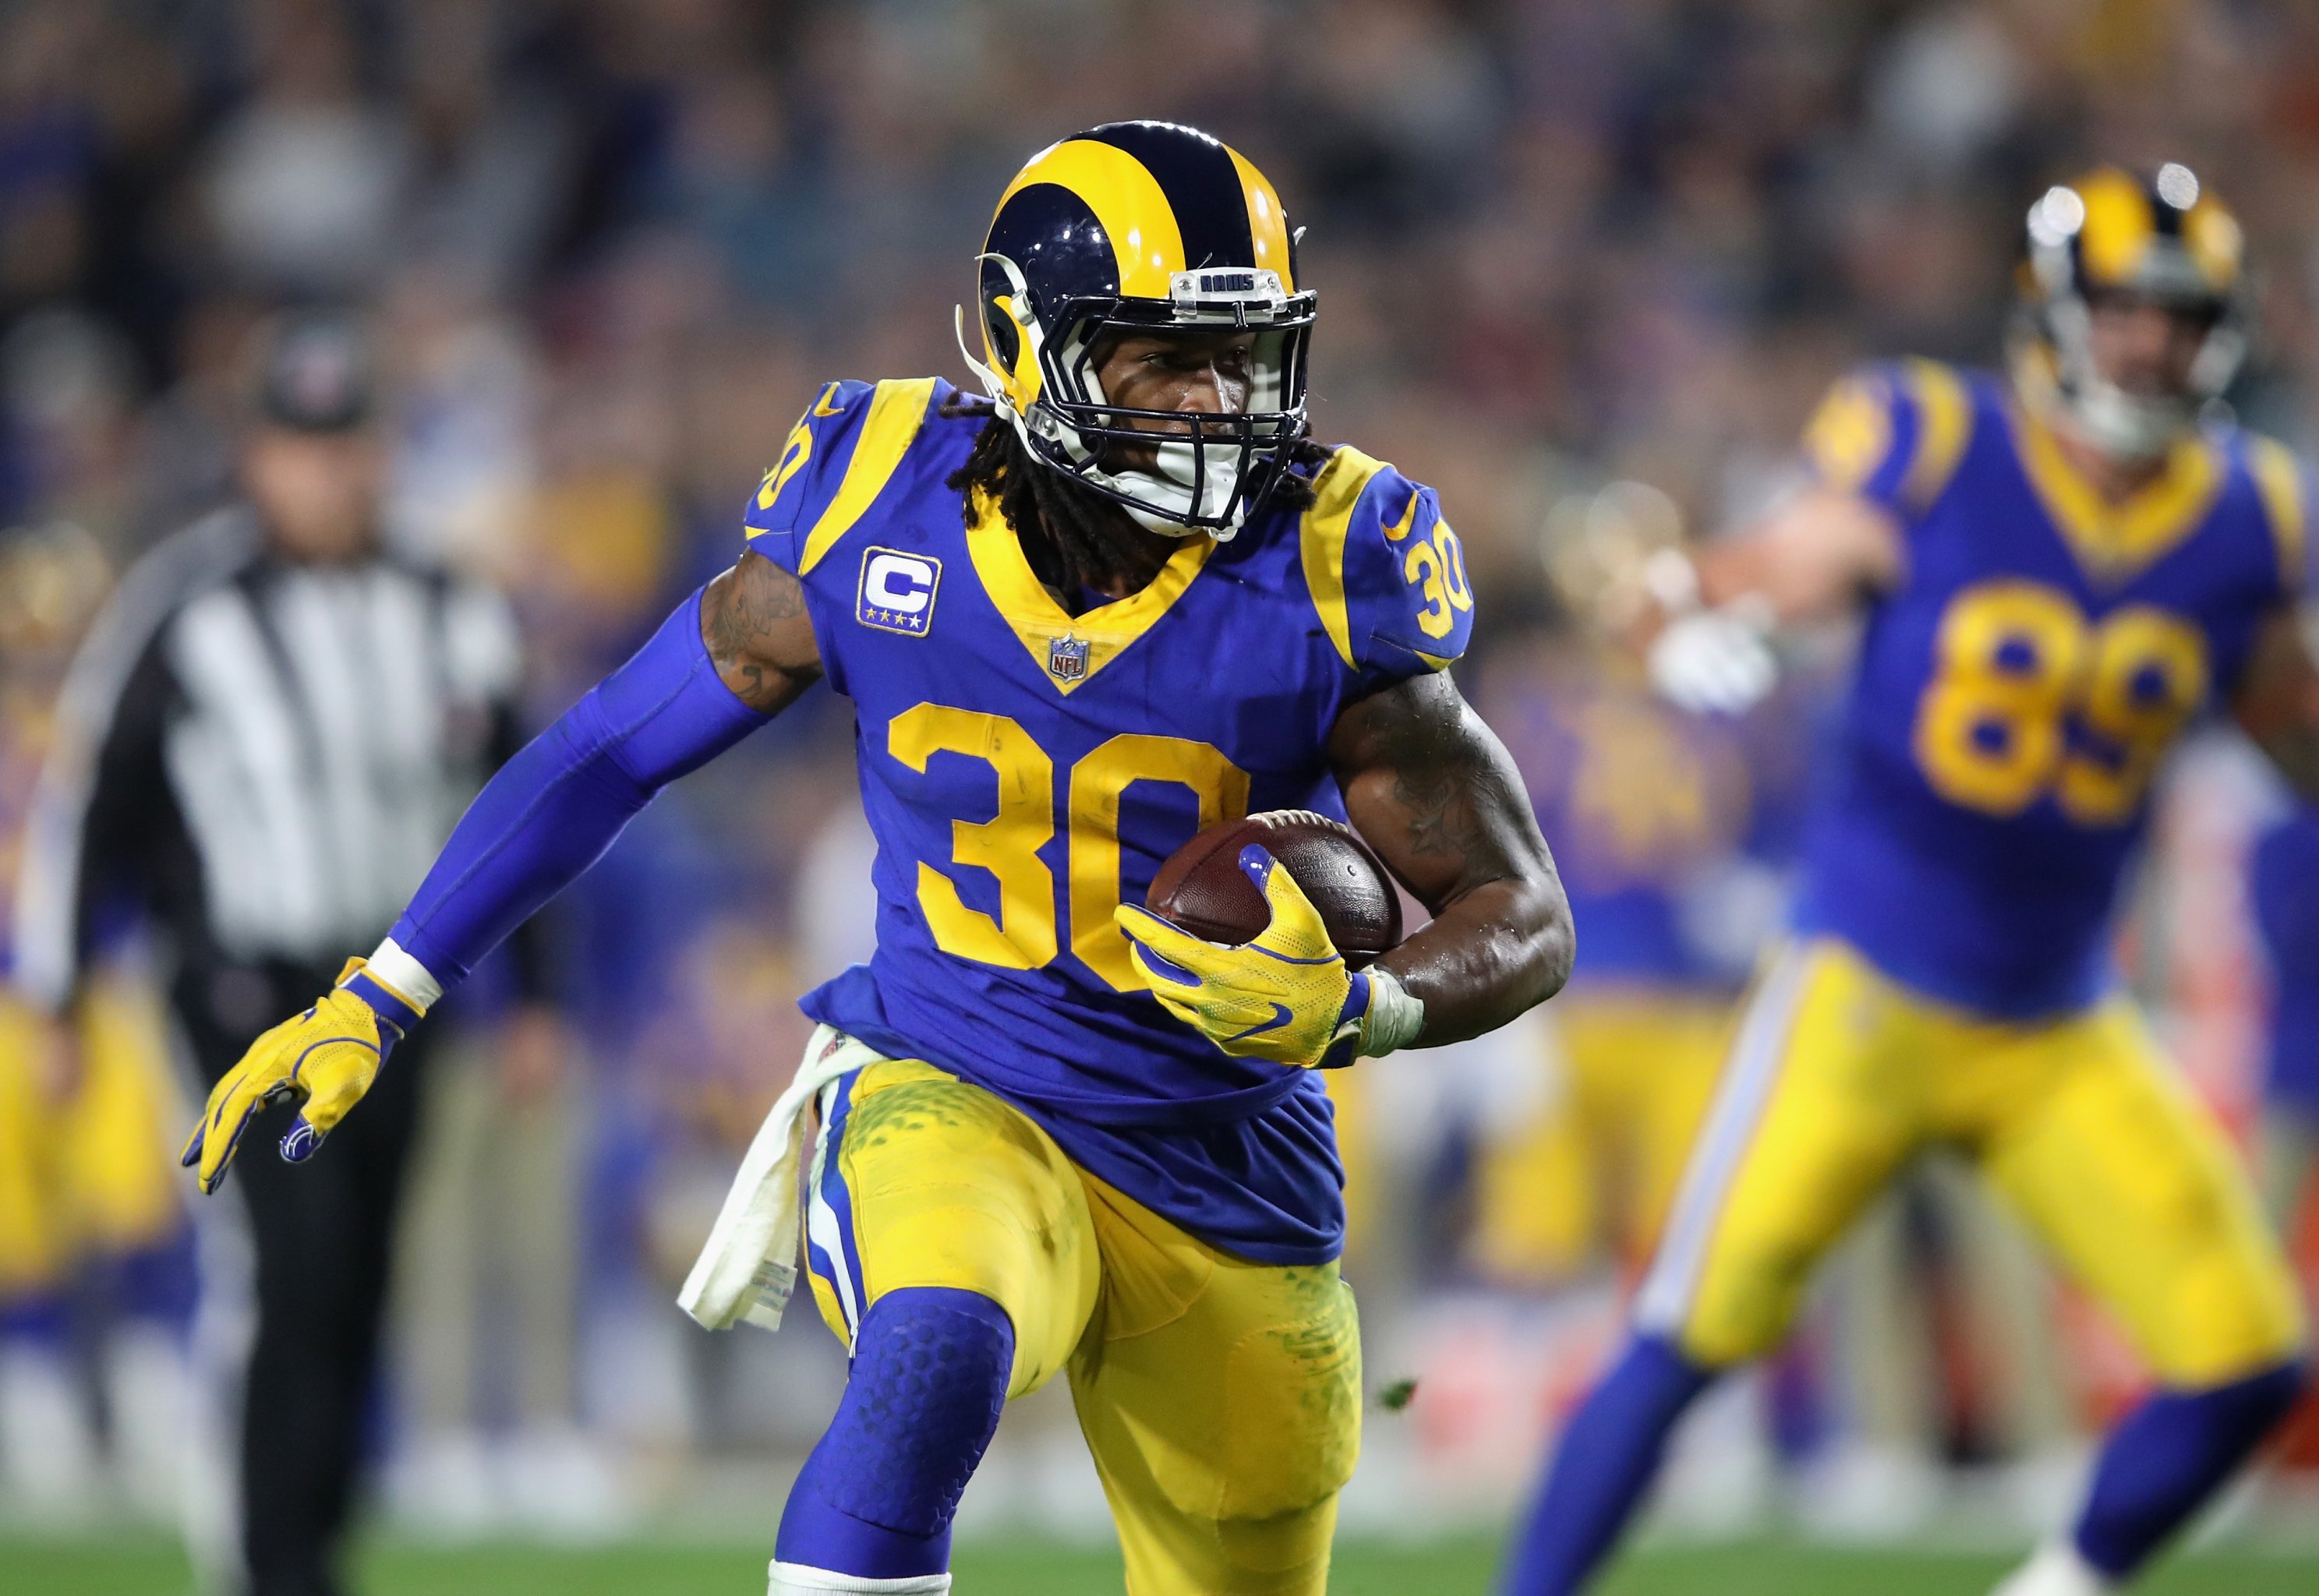 NFL playoff schedule 2019: How to watch Saturday's Divisional Round games -  Big Blue View